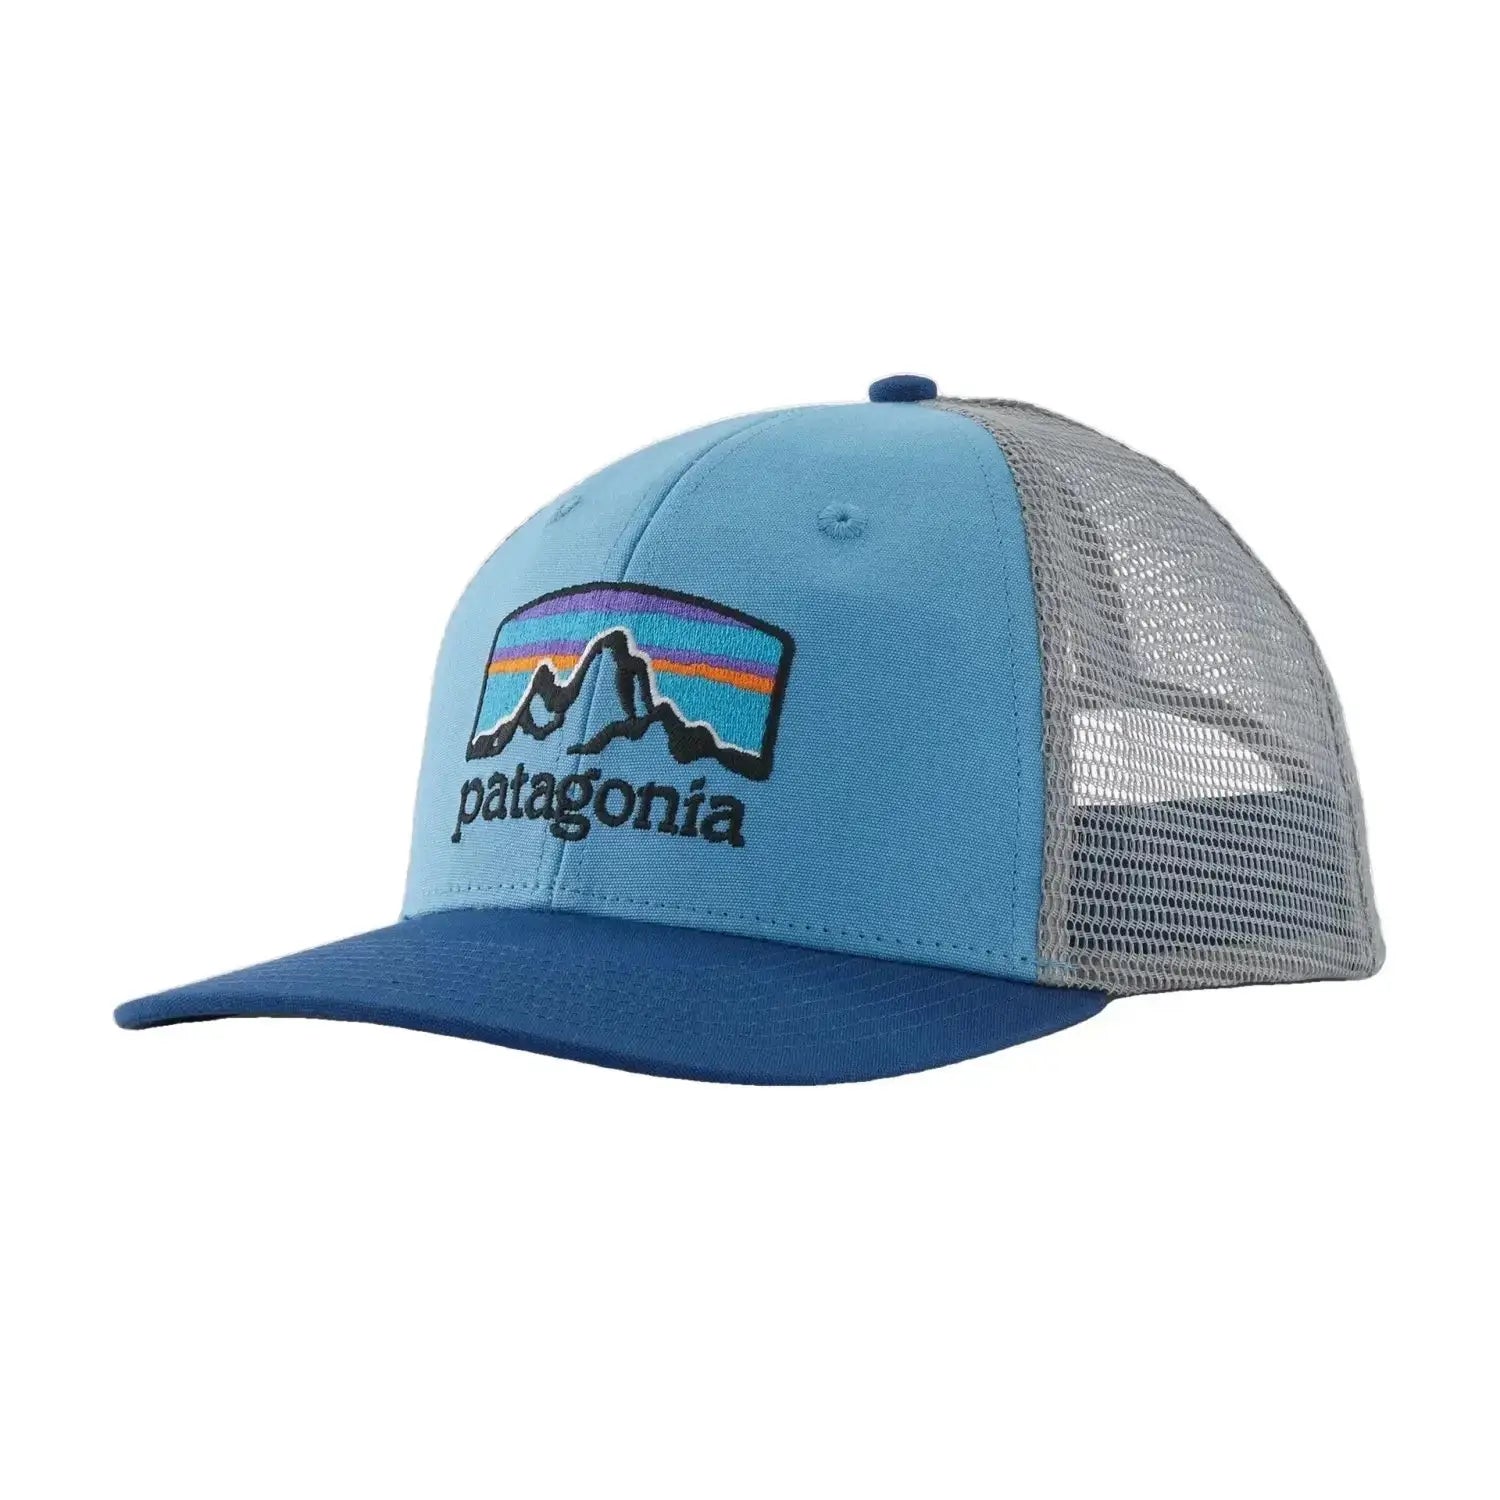 Patagonia Fitz Roy Horizons Trucker Hat, Lago Blue, front view